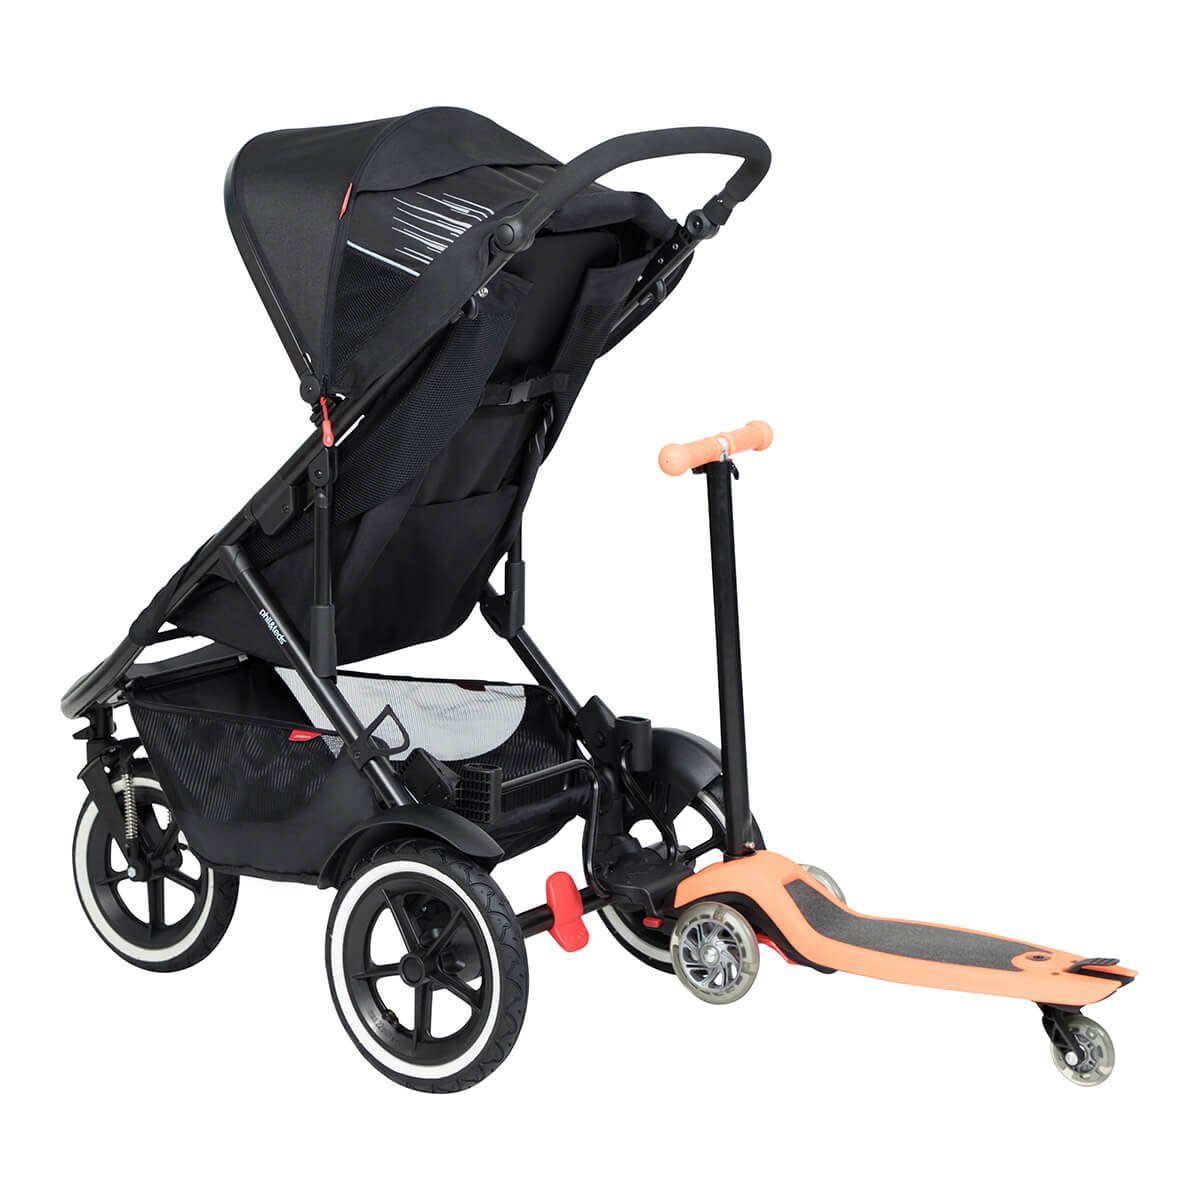 https://cdn.accentuate.io/4546158067817/19119322824809/philteds-sport-buggy-with-freerider-stroller-board-in-rear-v1625778341425.jpg?1200x1200